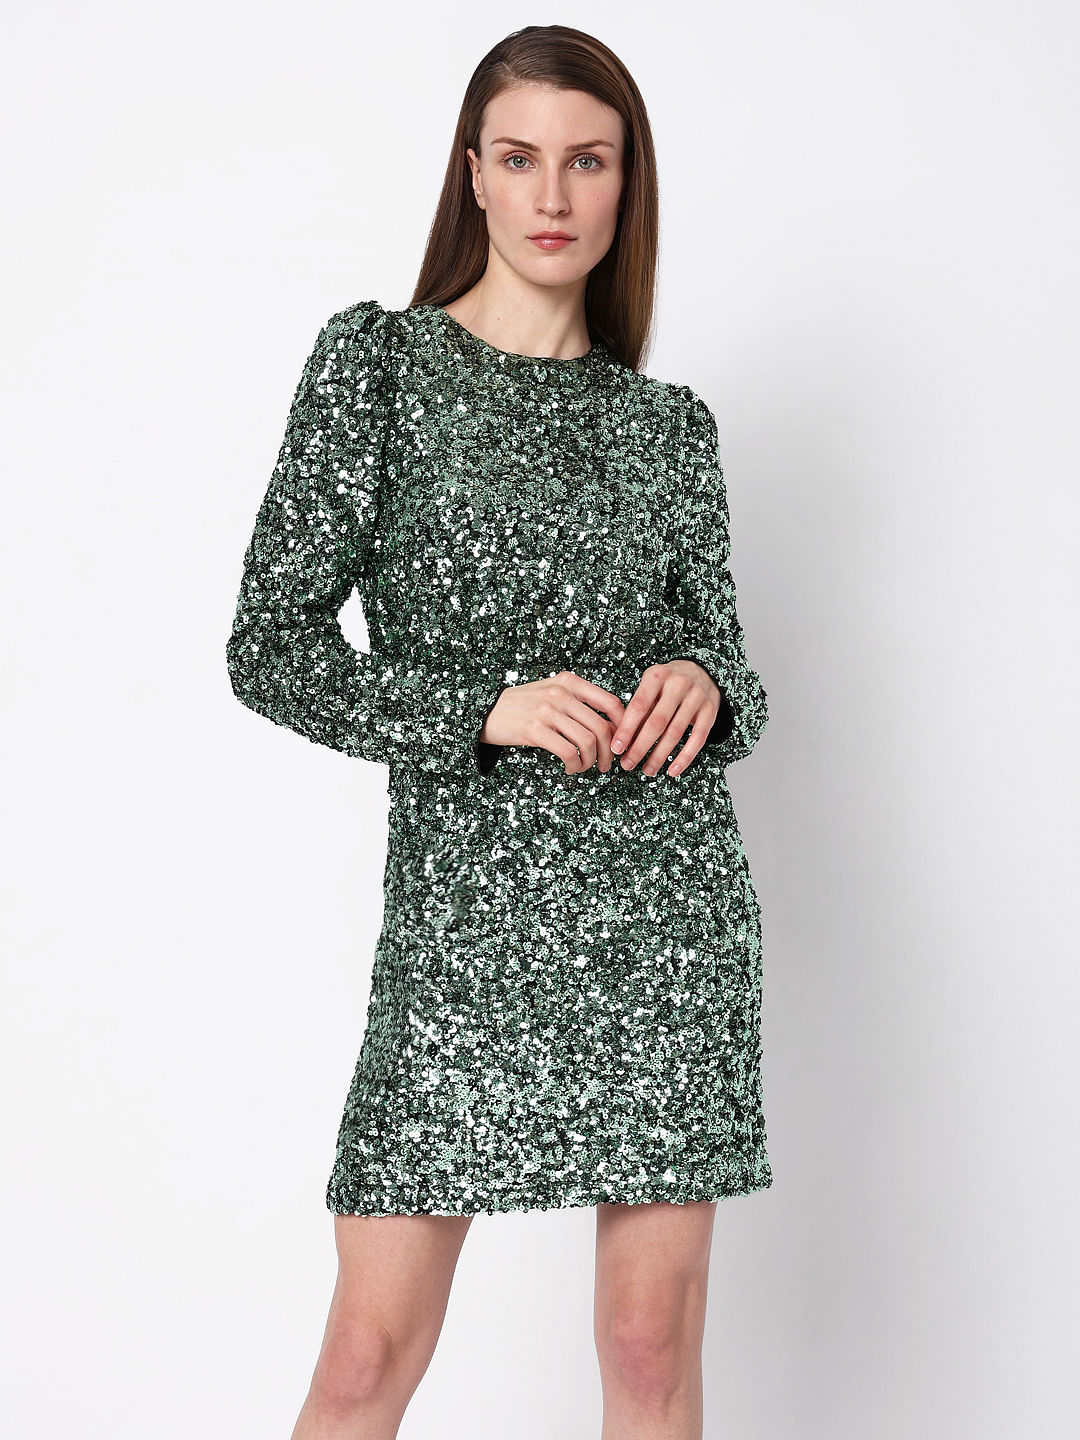 Zara STRAPLESS FITTED SEQUIN DRESS | Yorkdale Mall